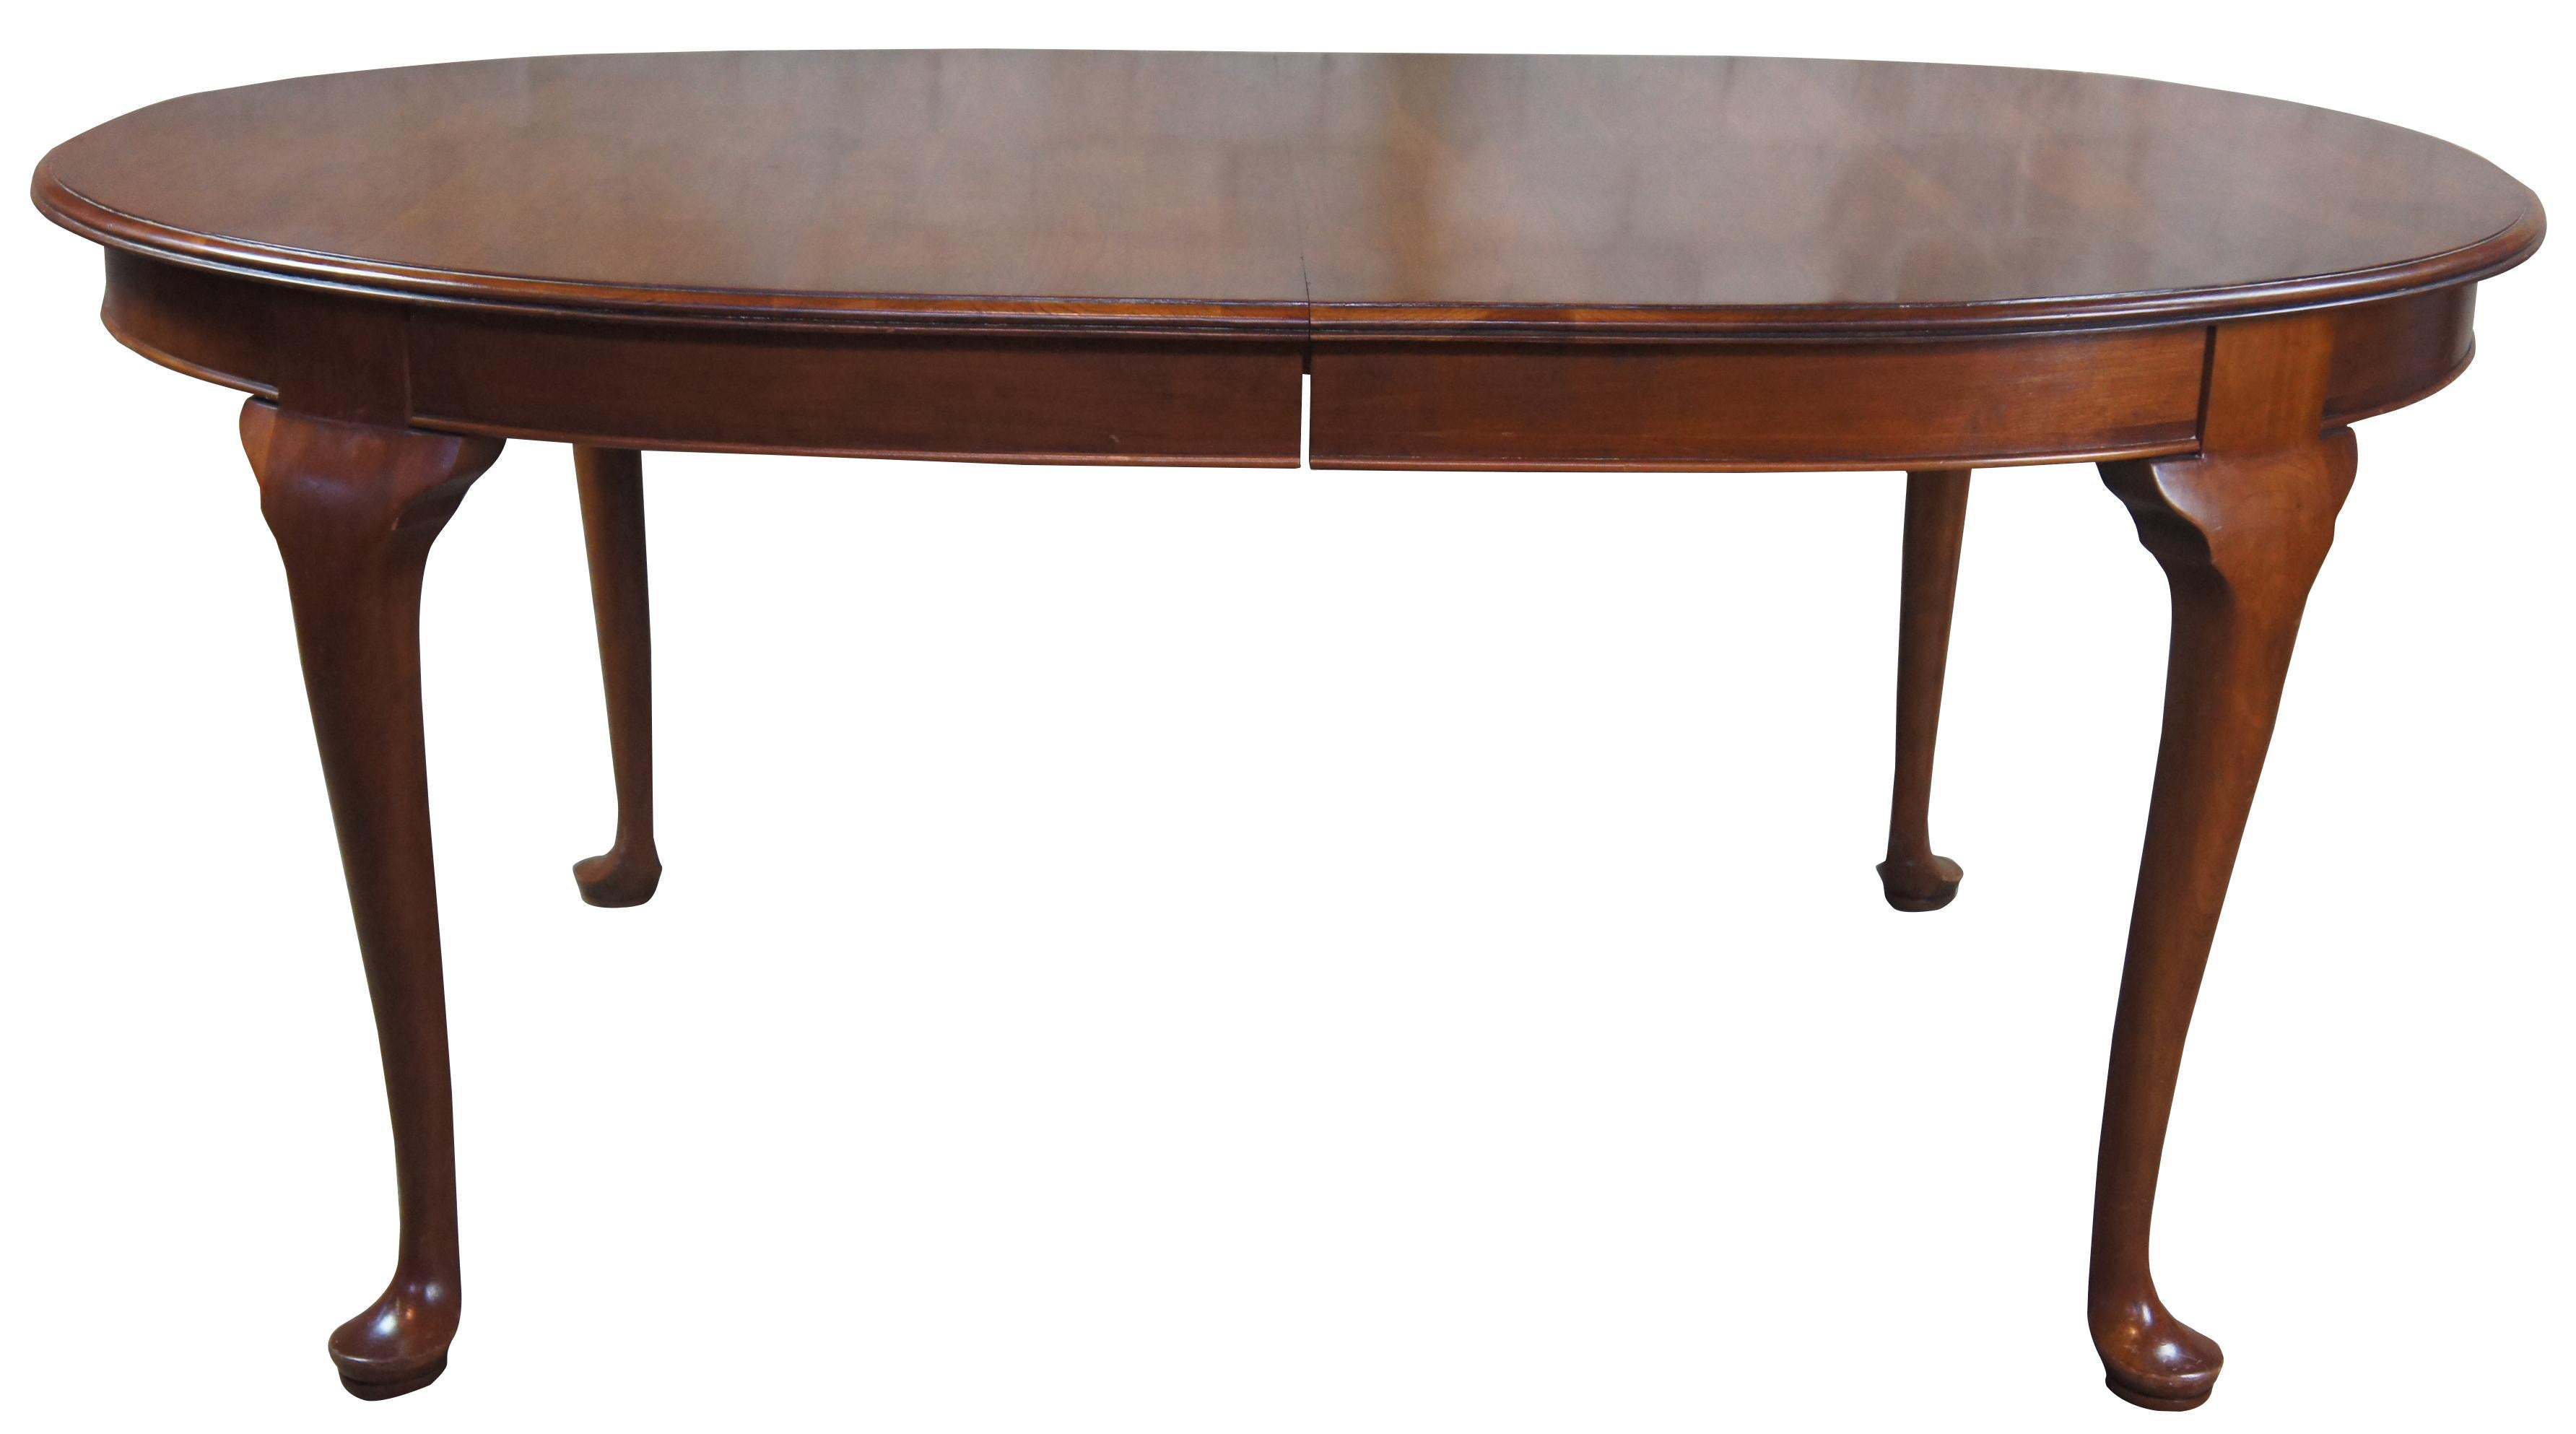 Solid cherry oval dining room table by Penn House, circa 1971. Features a Queen Anne style with cabriole legs leading to pad feet. Table pads included.